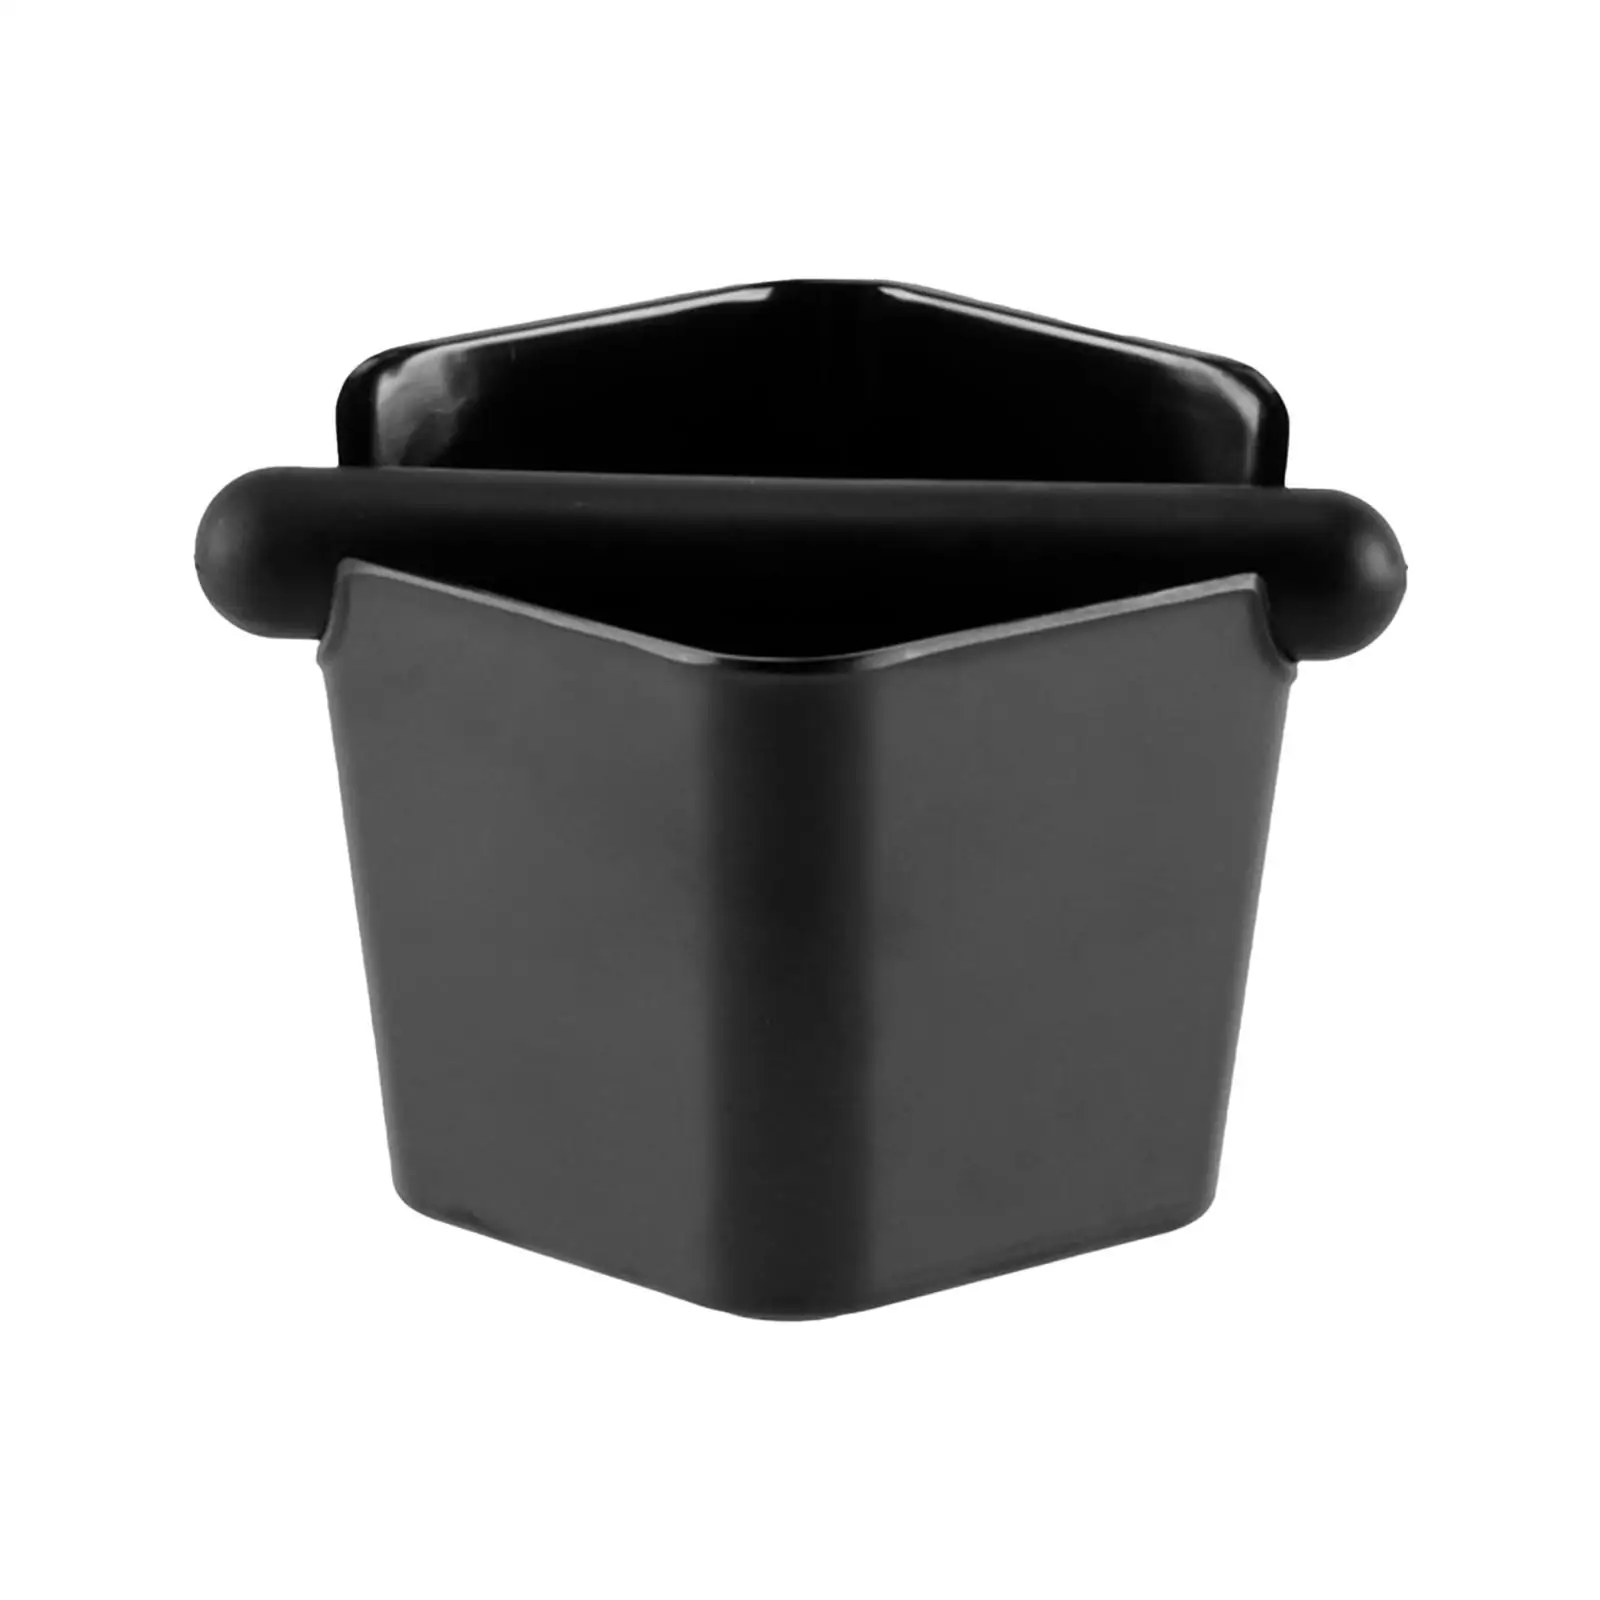 Espresso Waste Storage Box Durable Anti Skid Coffee Grounds Knock Barrels for Cafe